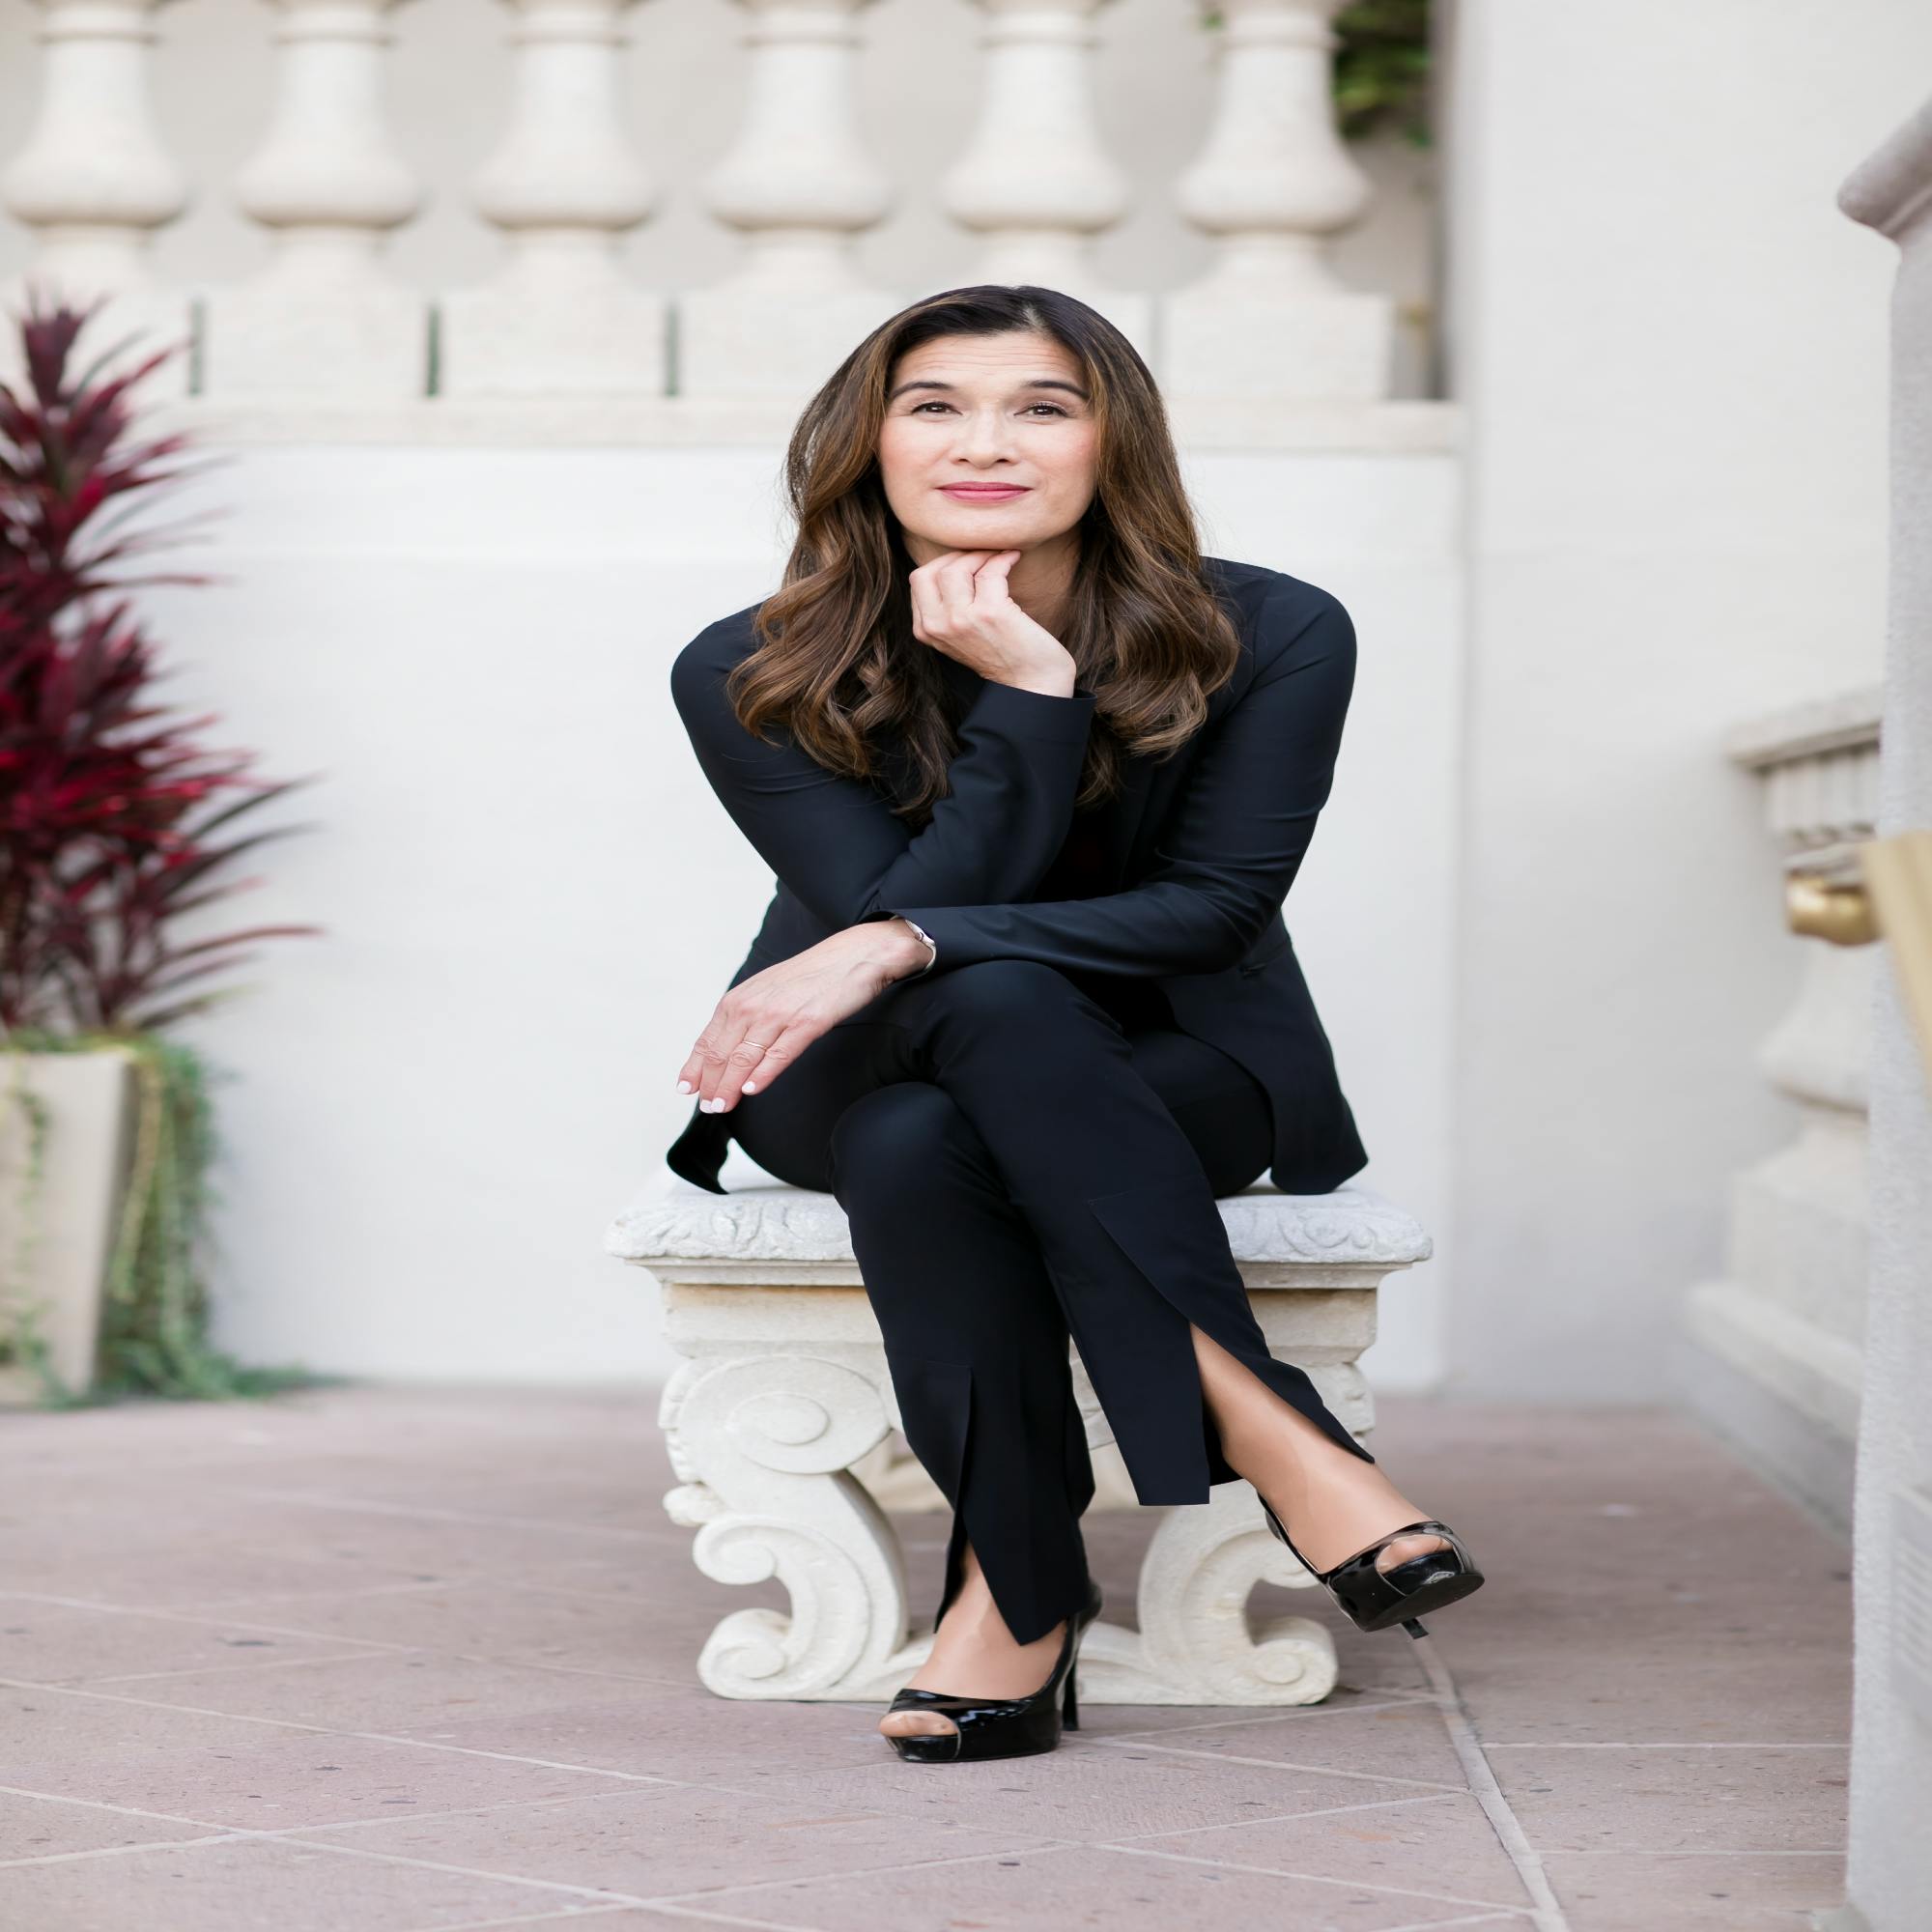 Author Marguerita Cheng to Launch New Book with Mission Matters and Women Connect4Good